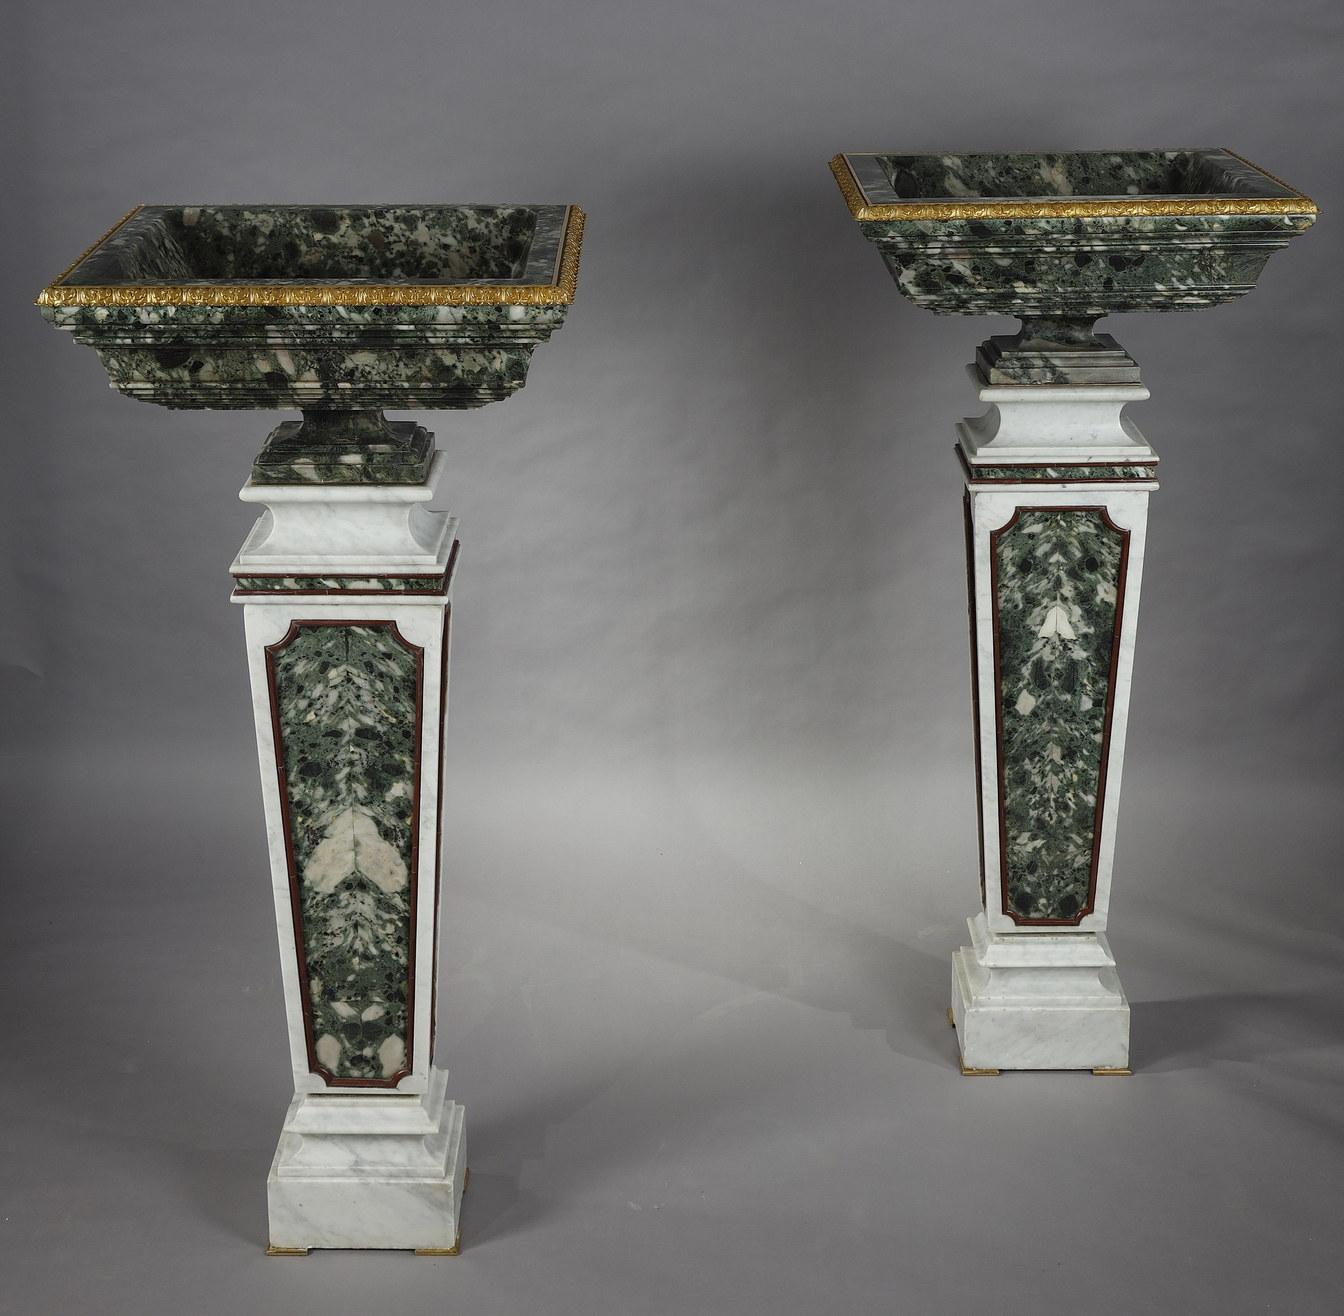 Measures: Height : 29 cm (11,4 in.) ; width : 61,5 cm (24,2 in.) ; depth : 55,5 cm (21,8 in.)
Total height : 139 cm (54,7 in.)

Important pair of rare Greek antique green marble basins with molded decoration framed by a leafy frieze in gilded